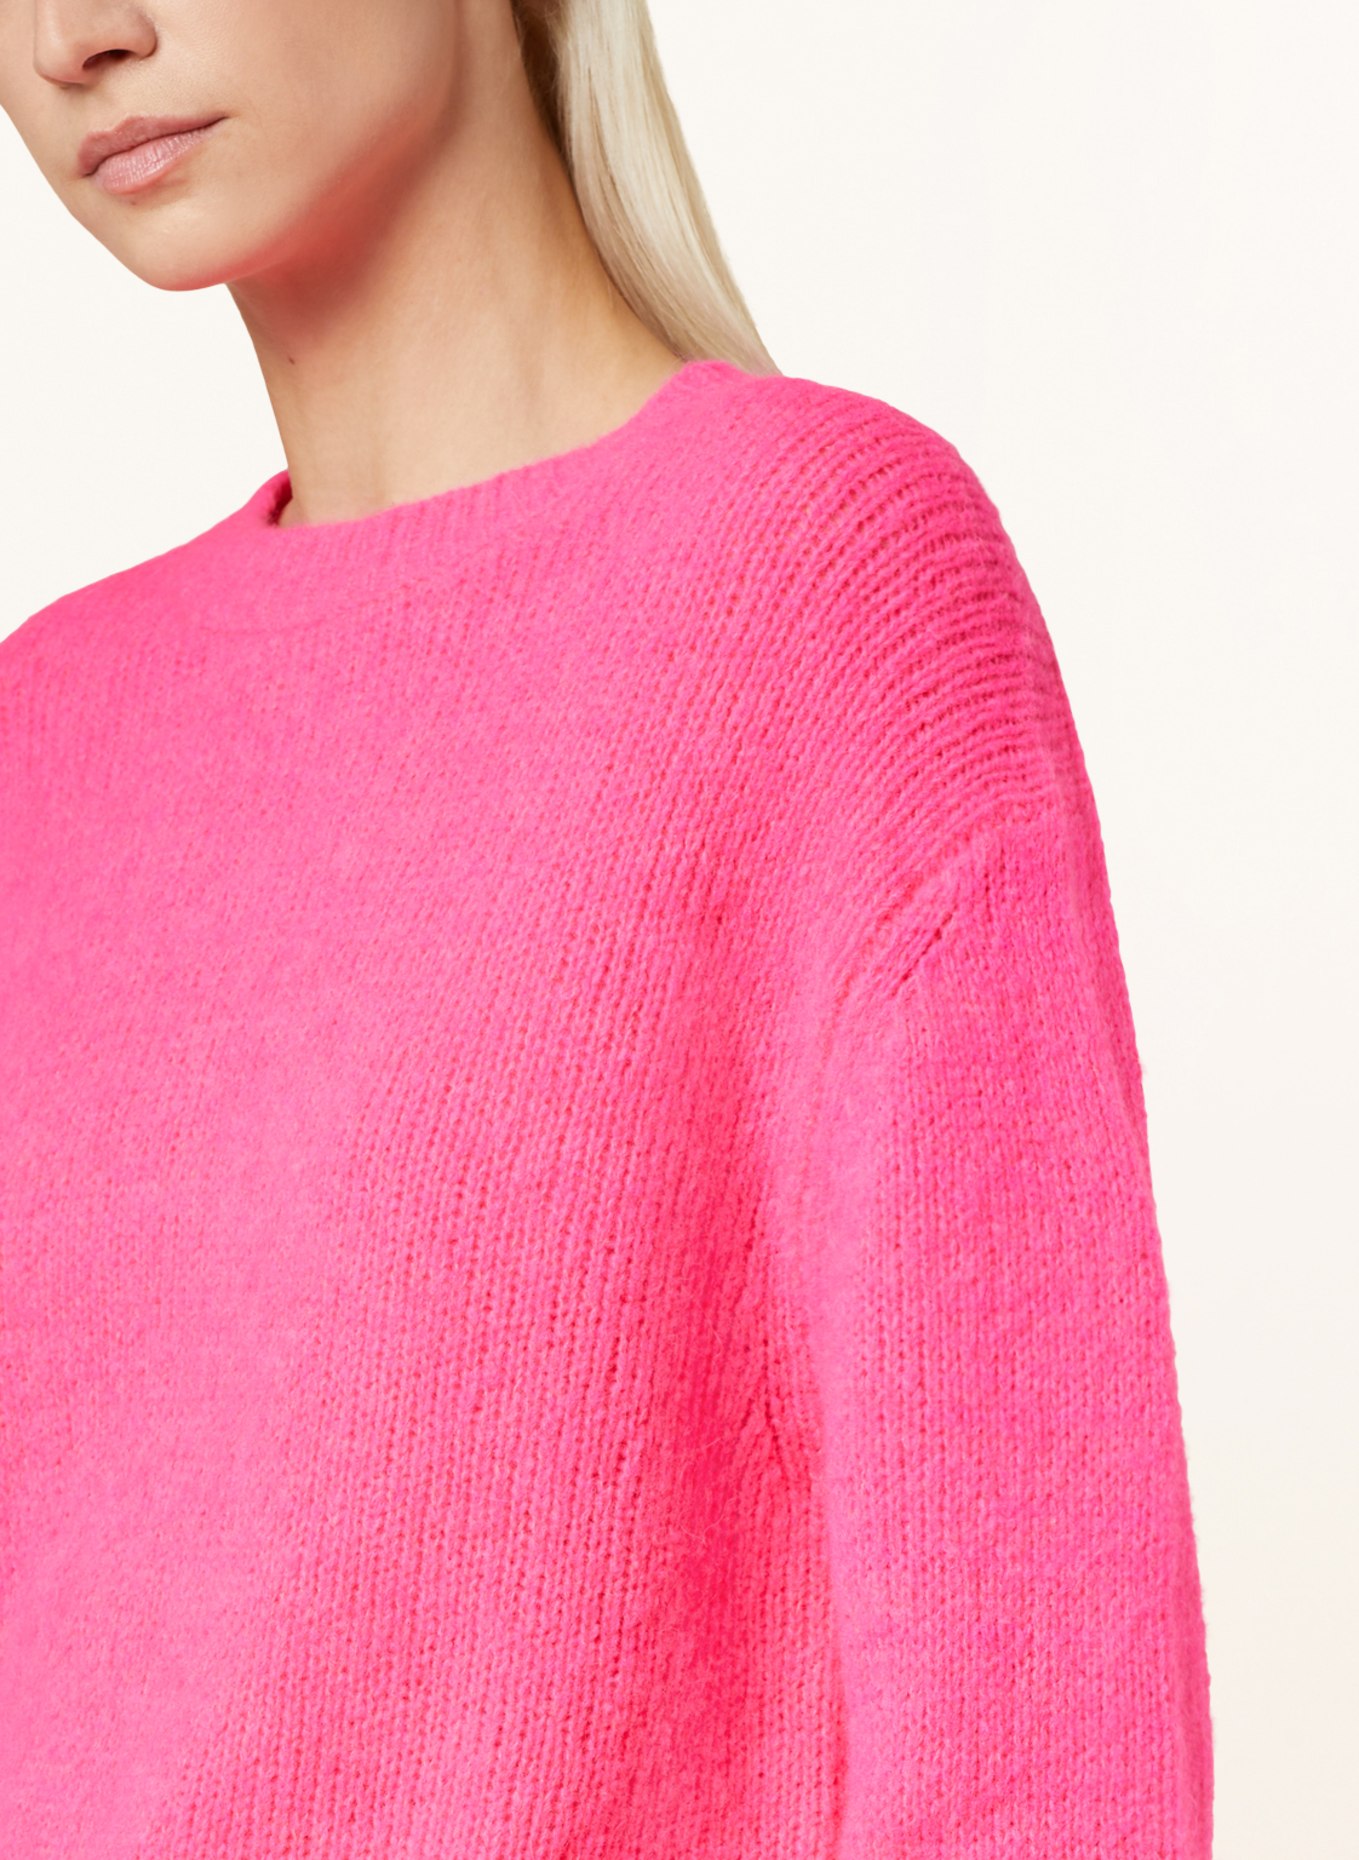 Princess GOES HOLLYWOOD Sweater with merino wool, Color: NEON PINK (Image 5)